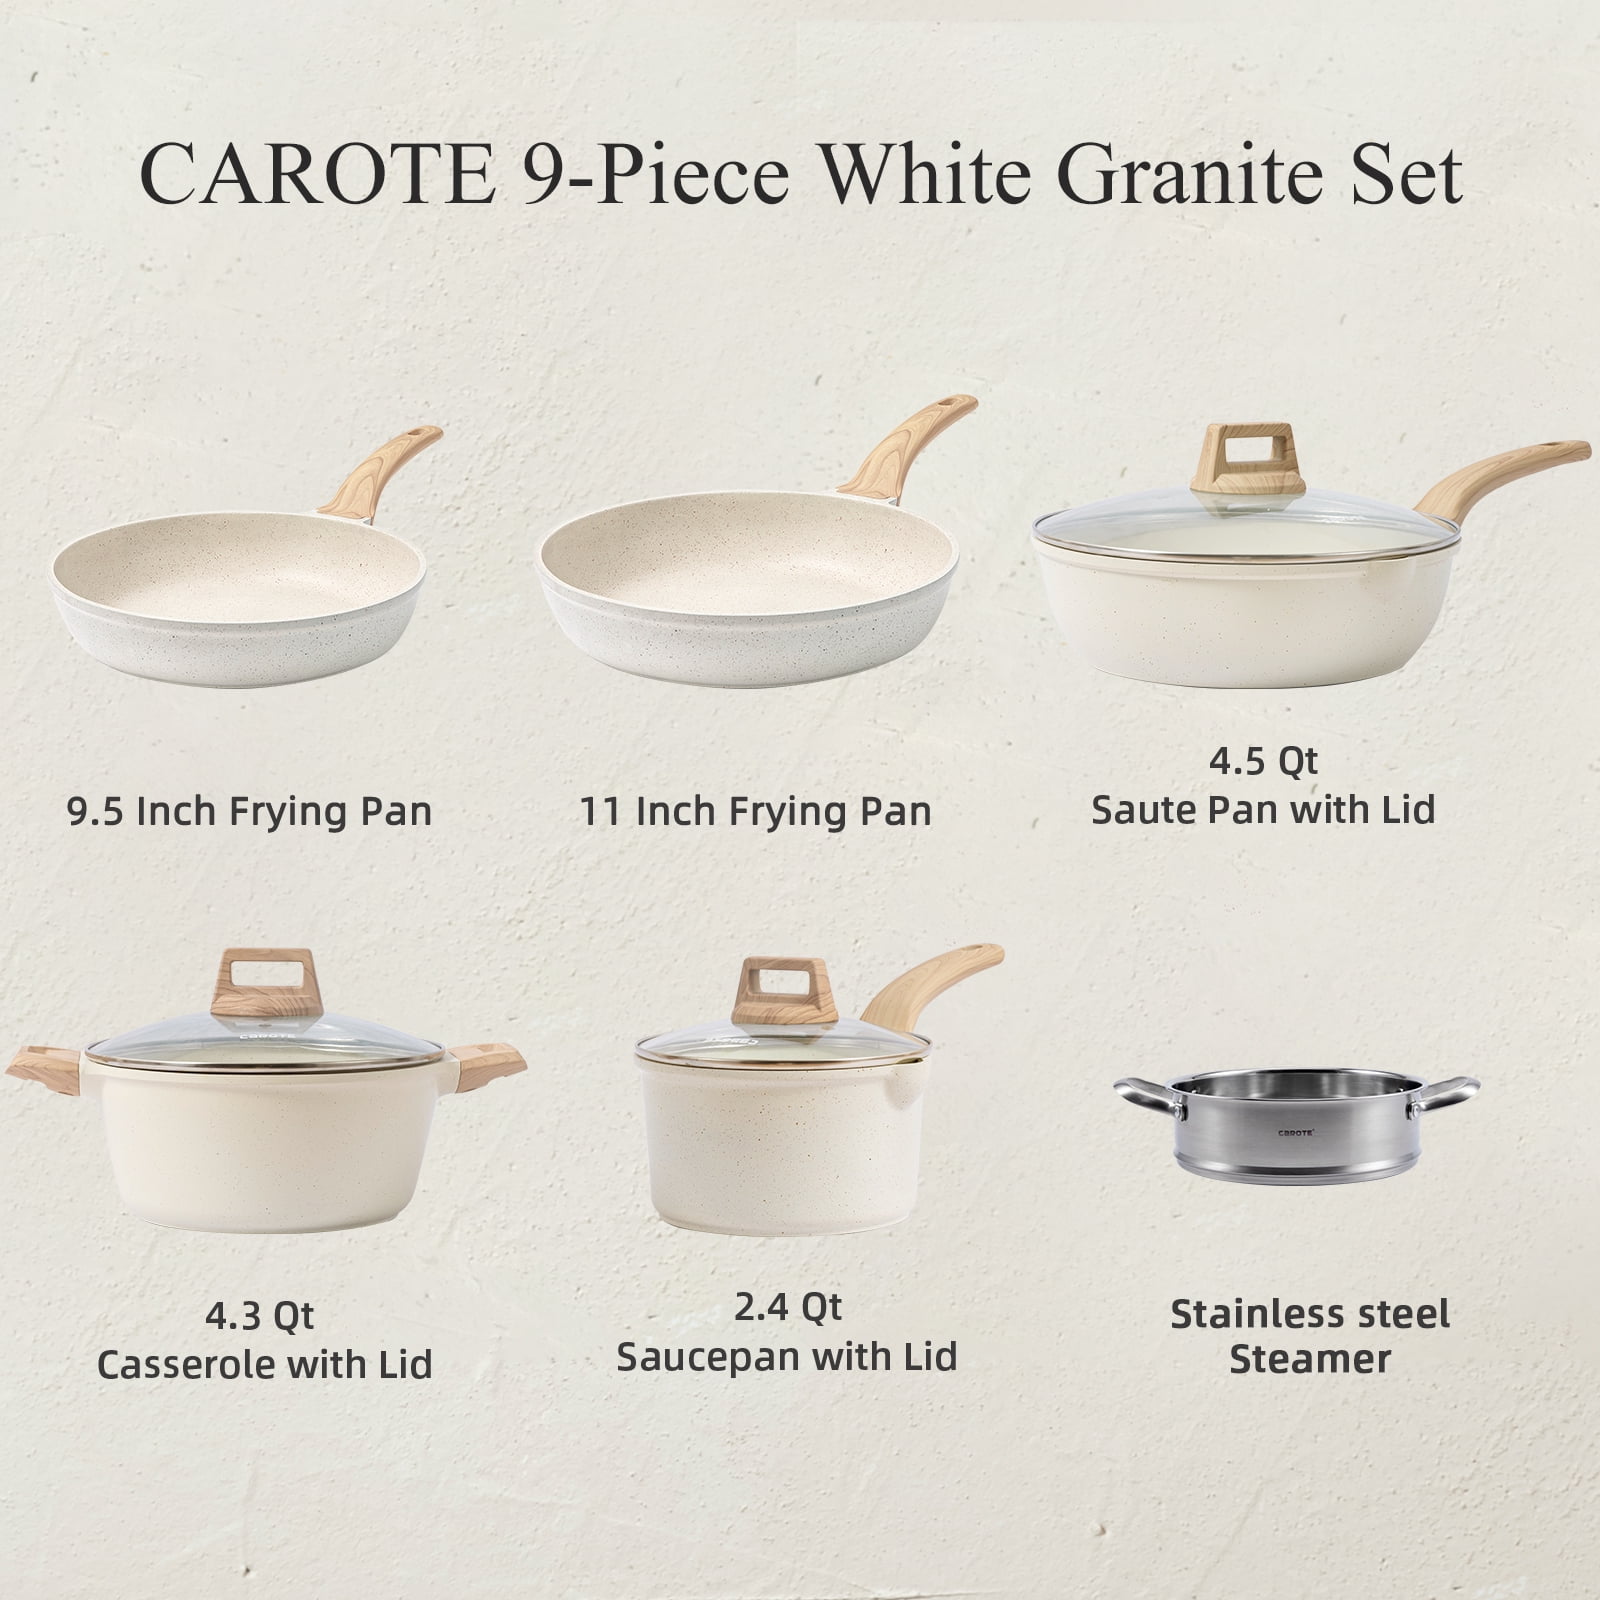 Carote Nonstick Granite Cookware Sets, 10 Pcs Brown Granite Pots and Pans Set, Induction Stone Kitchen Cooking Set, Size: 9.5/11 inch Frying Pan 3.7